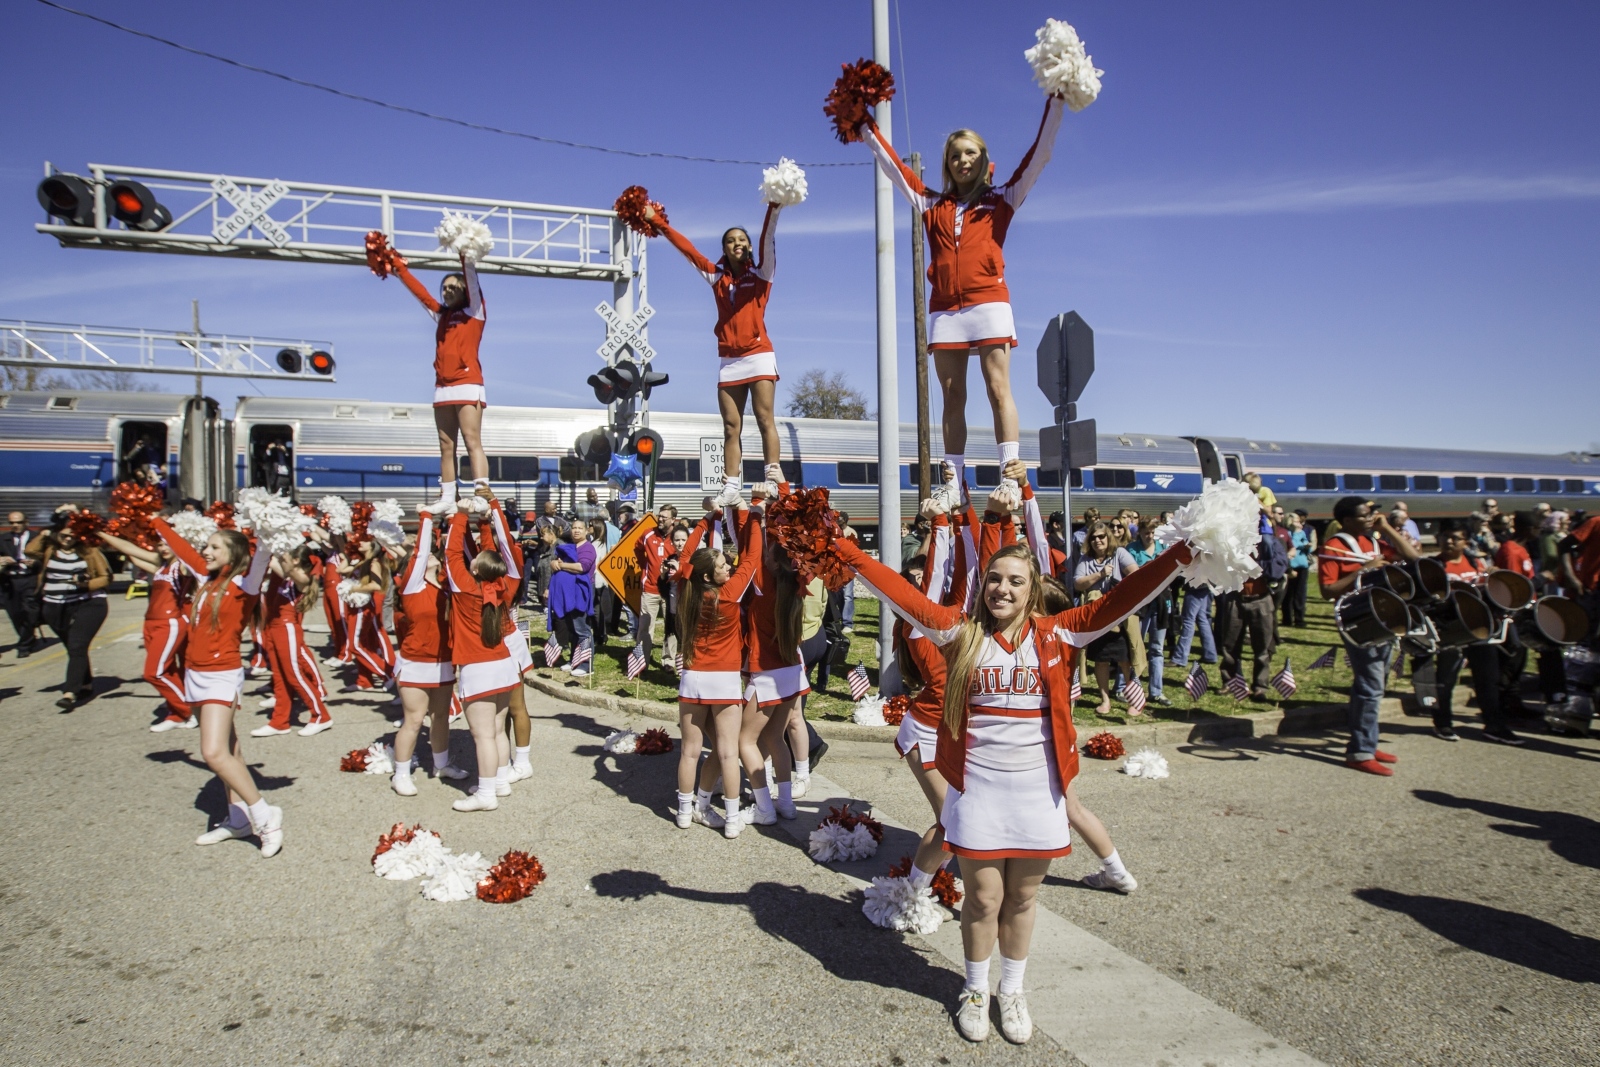 Cheerleaders dressed in red celebrated in front of an Amtrak train during a crowded station event.